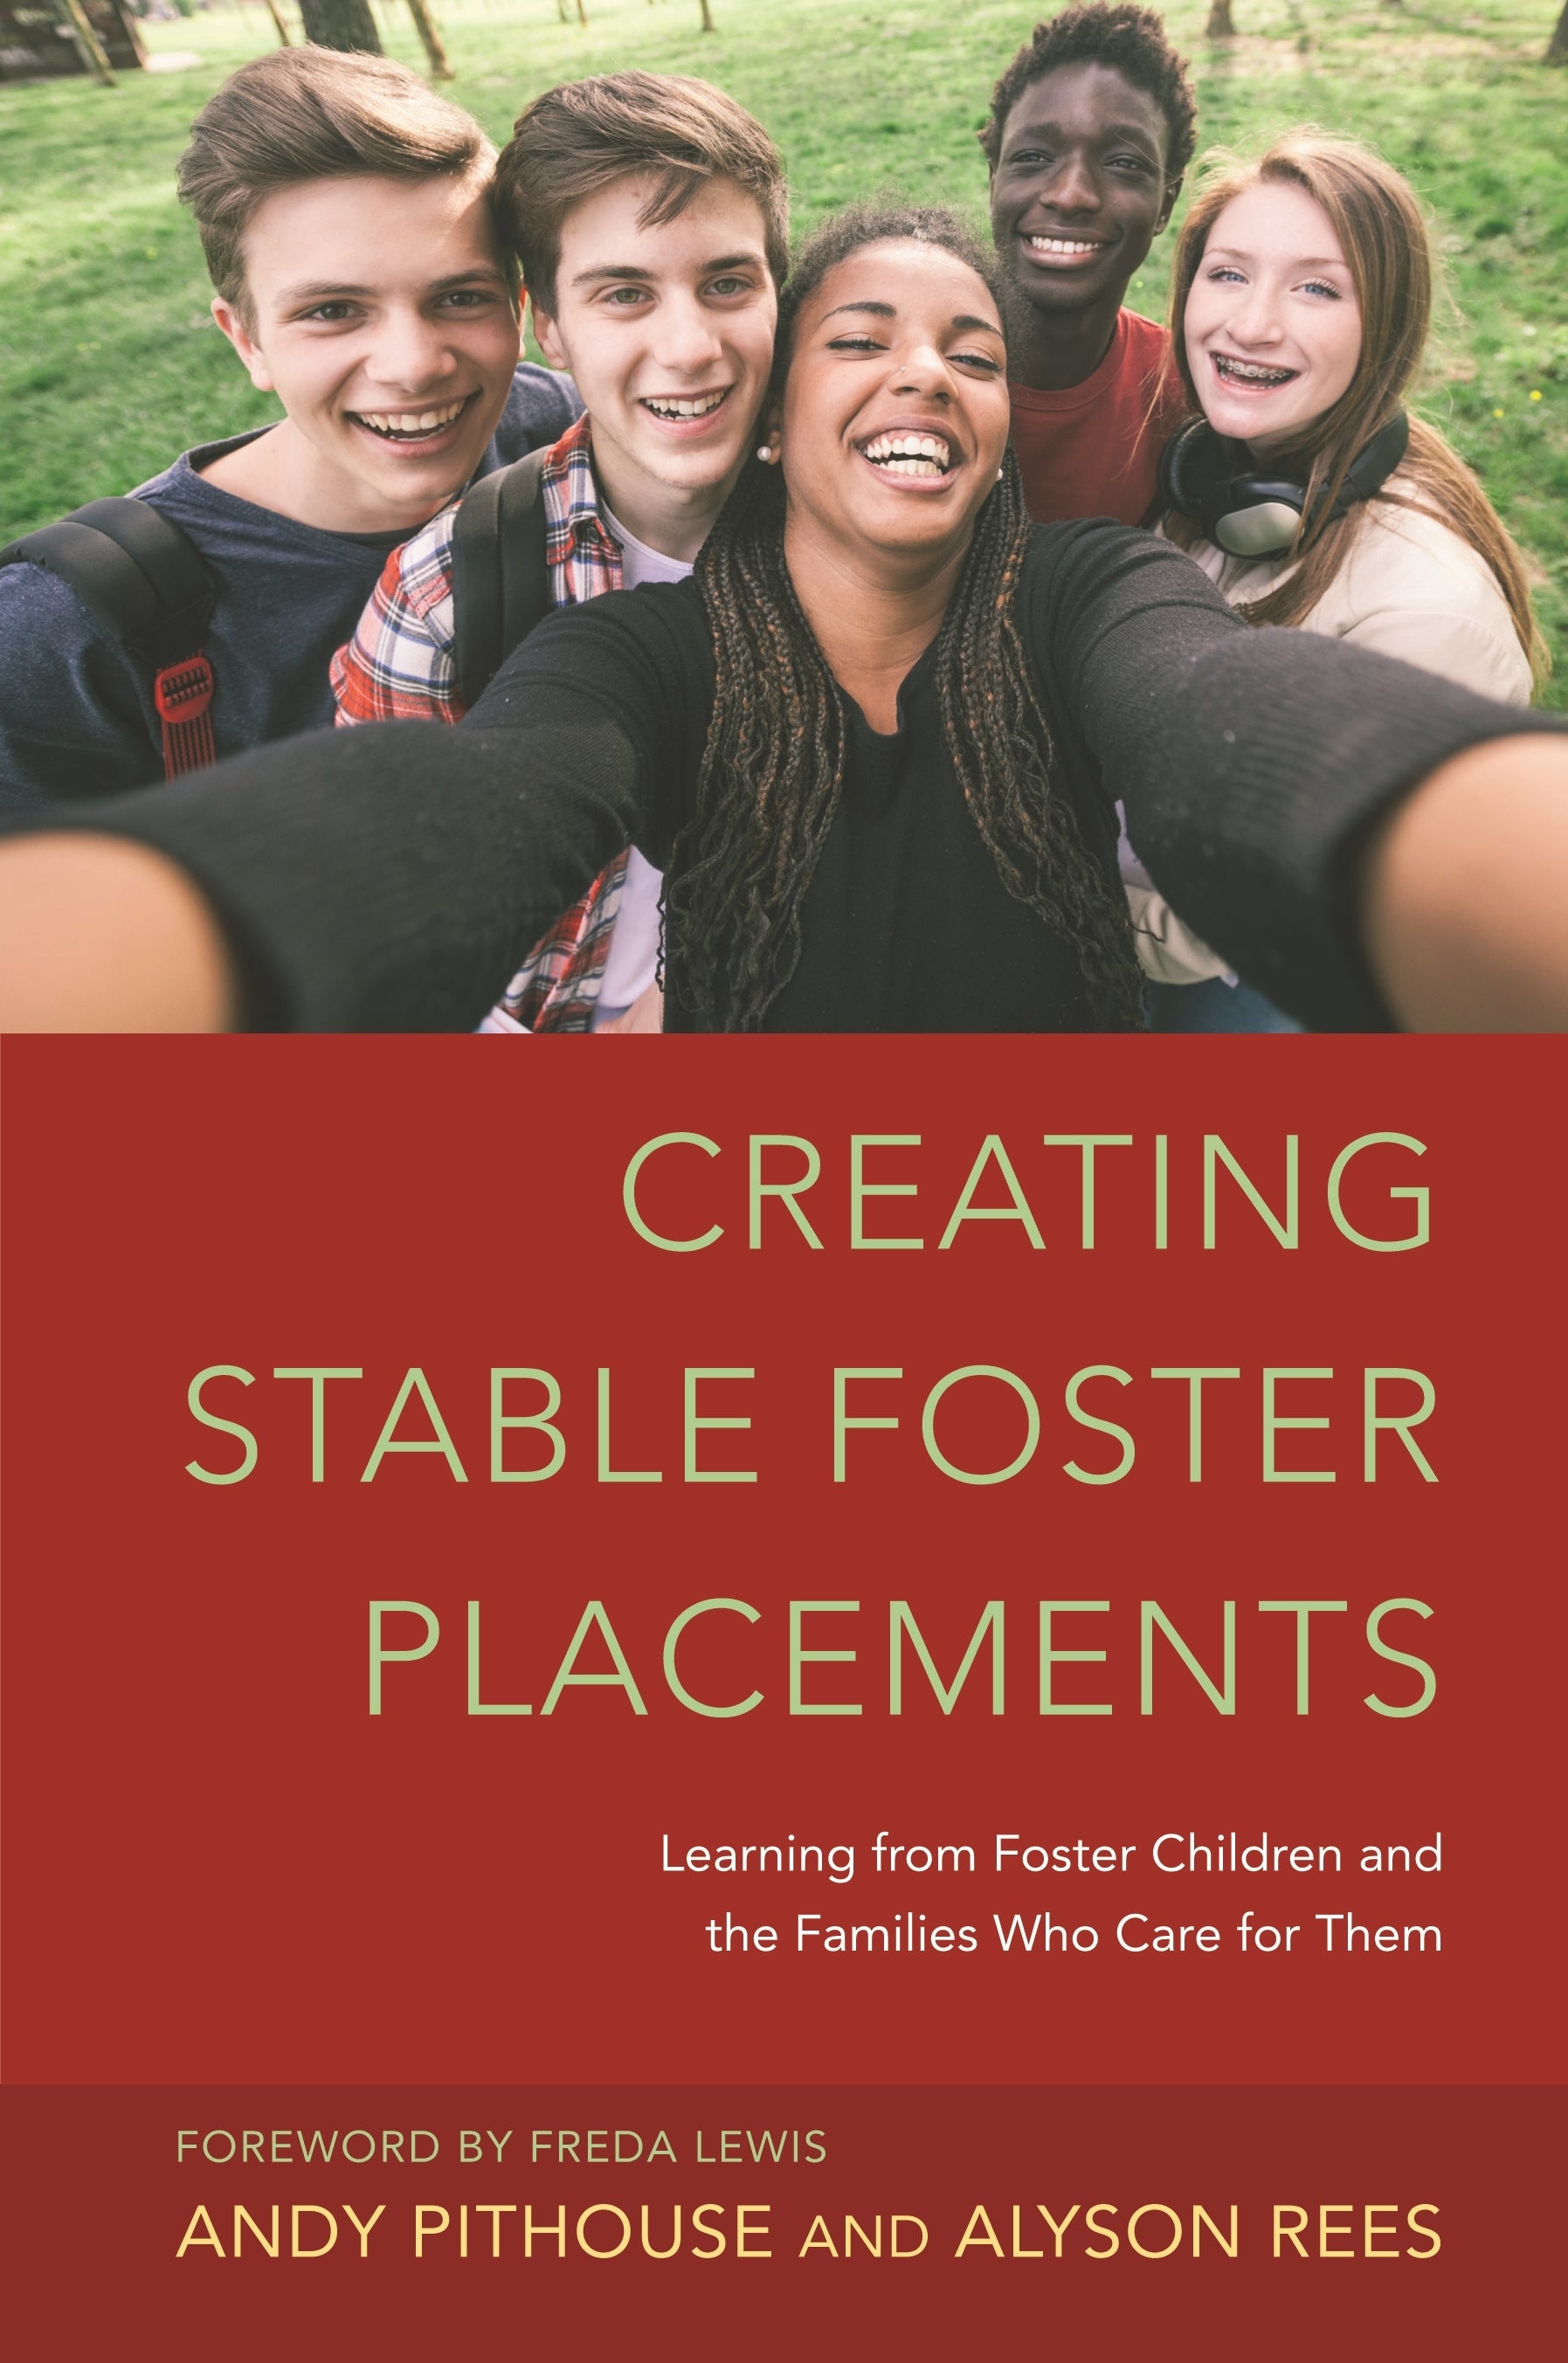 Creating Stable Foster Placements by Freda Lewis, Alyson Rees, Andrew Pithouse